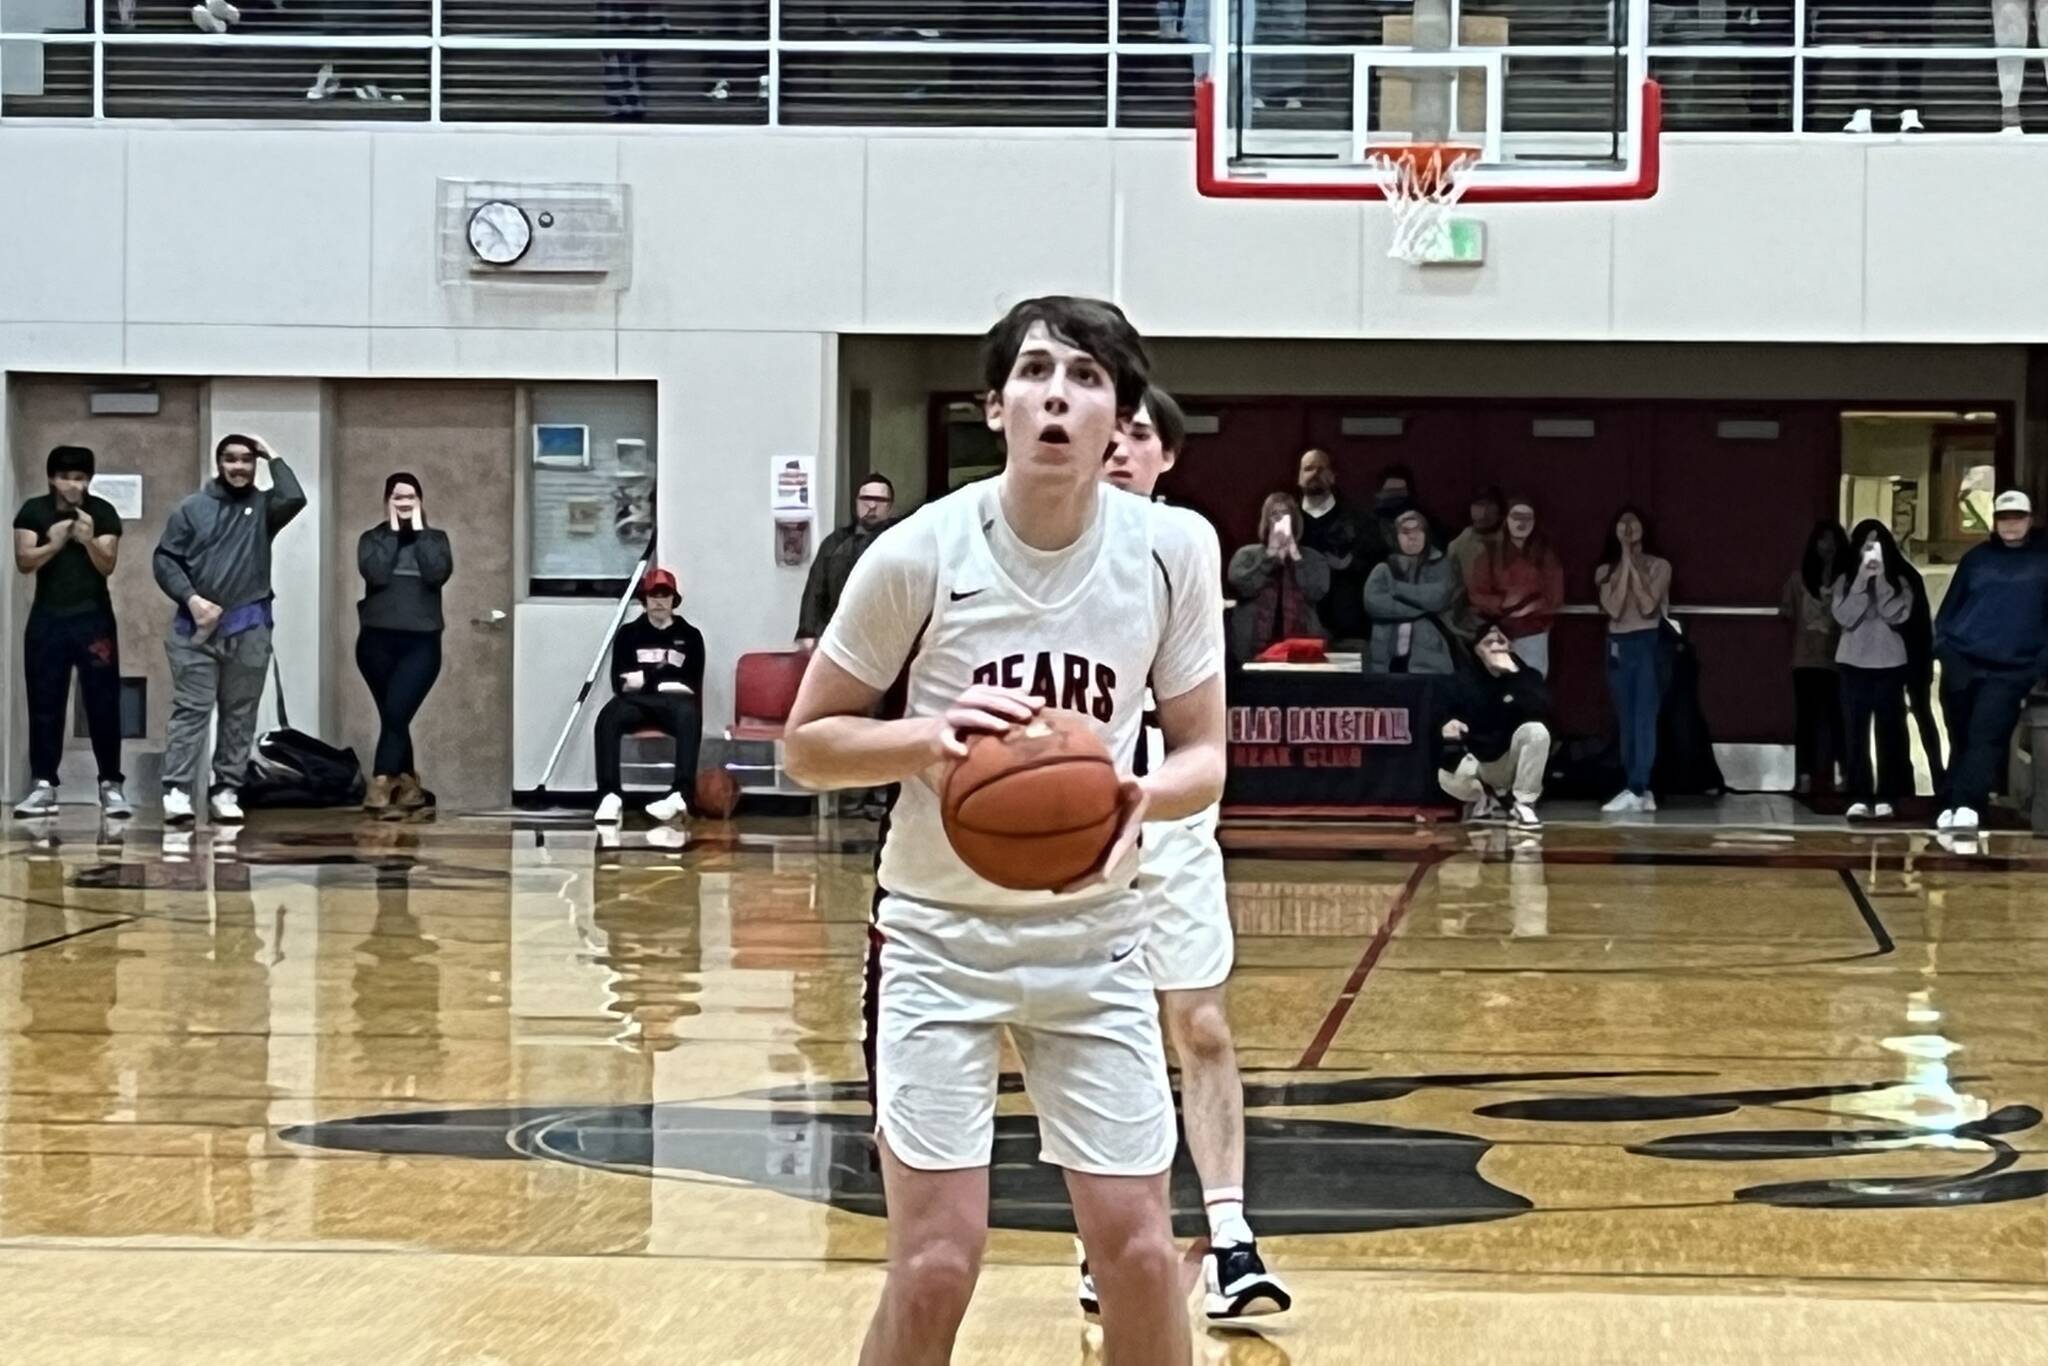 JDHS senior Kai Hargrave sets up to take the first of two free throw shots with 1.7 seconds left in Wednesday night’s game against Thunder Mountain High School. Hargrave’s last second shot secured the win for the Crimson Bears in their first conference game of the season. (Jonson Kuhn / Juneau Empire)